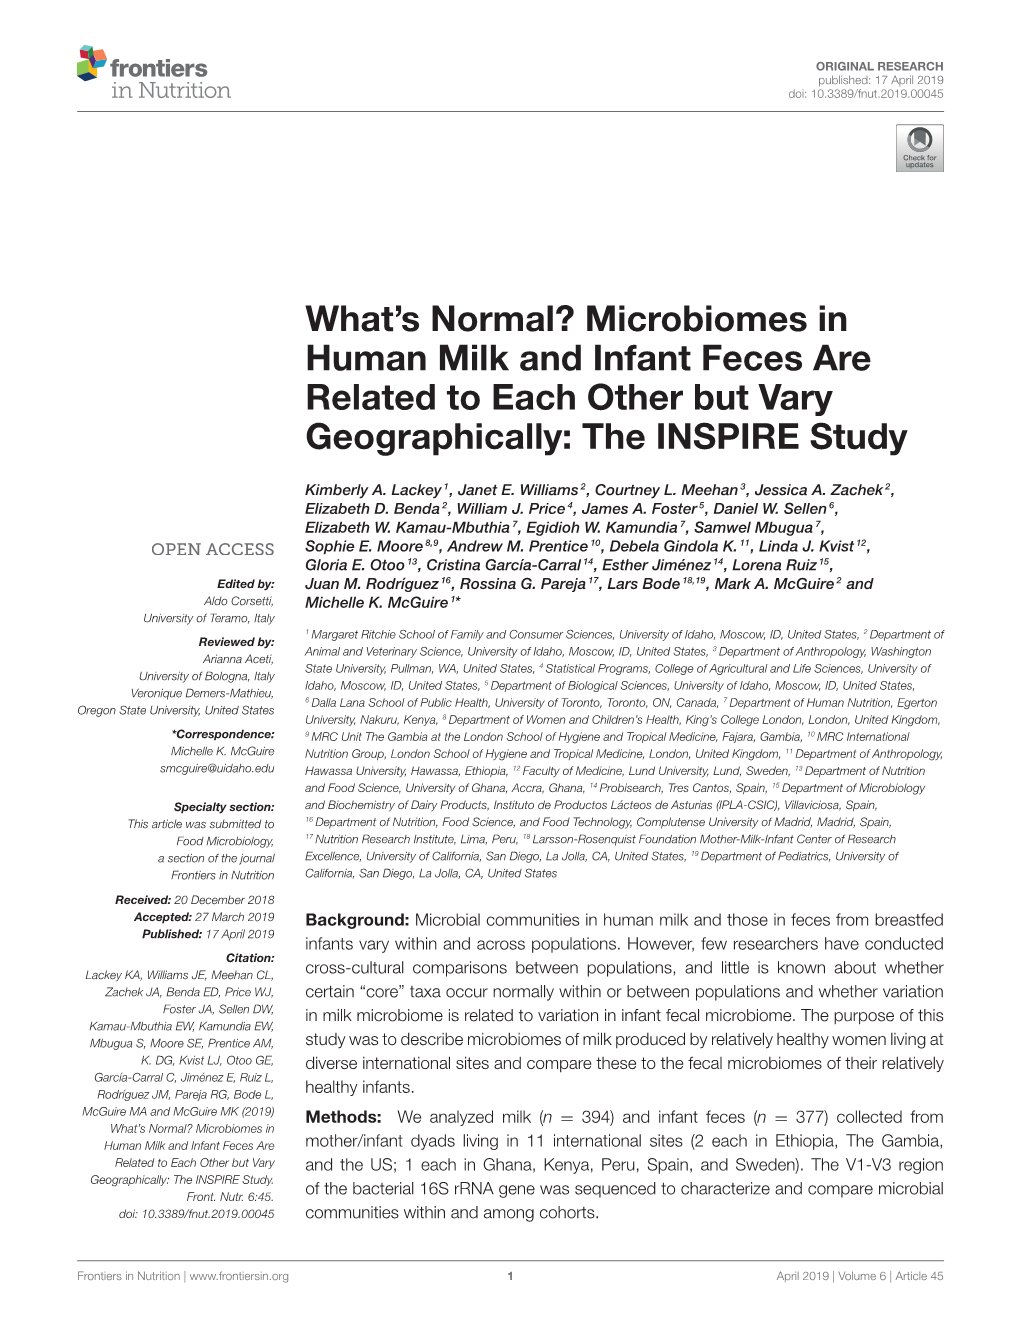 Microbiomes in Human Milk and Infant Feces Are Related to Each Other but Vary Geographically: the INSPIRE Study